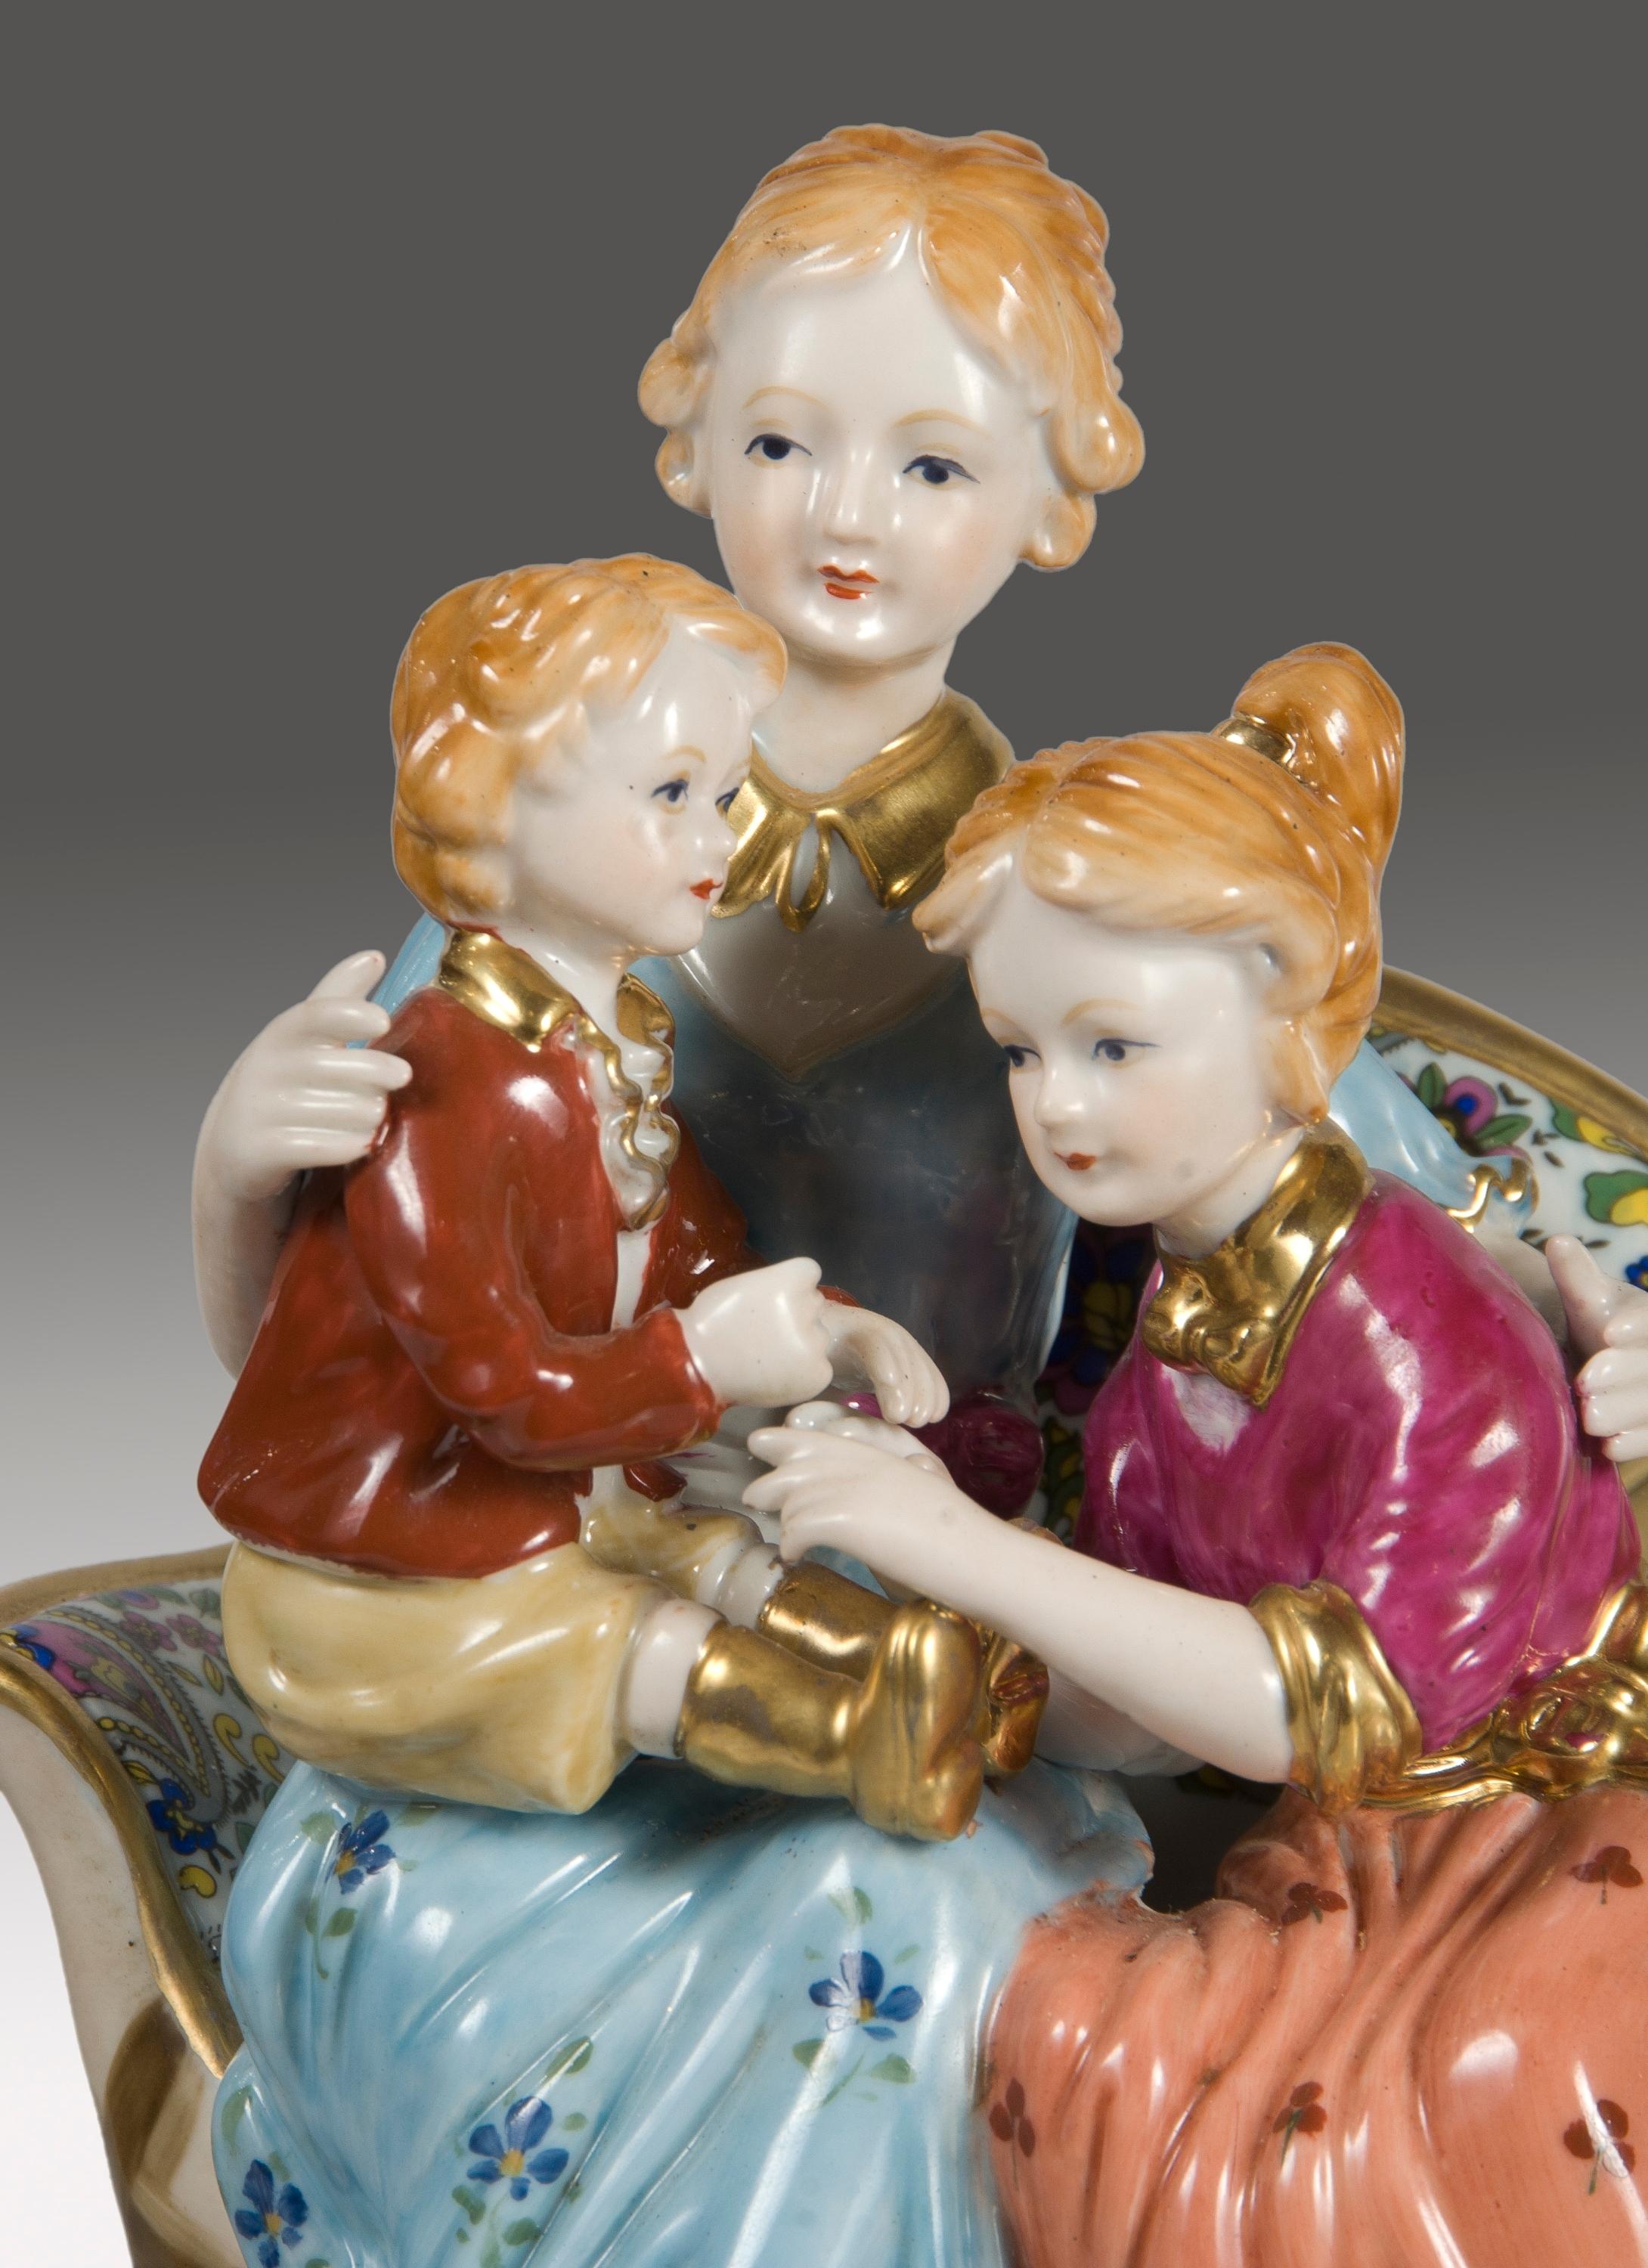 Enameled porcelain figure inspired by 18th century works of outstanding manufactures such as Sèvres, showing a lady sitting in an sofa and accompanied by a girl and a younger child. On the base there are details enhanced in gold similar to those